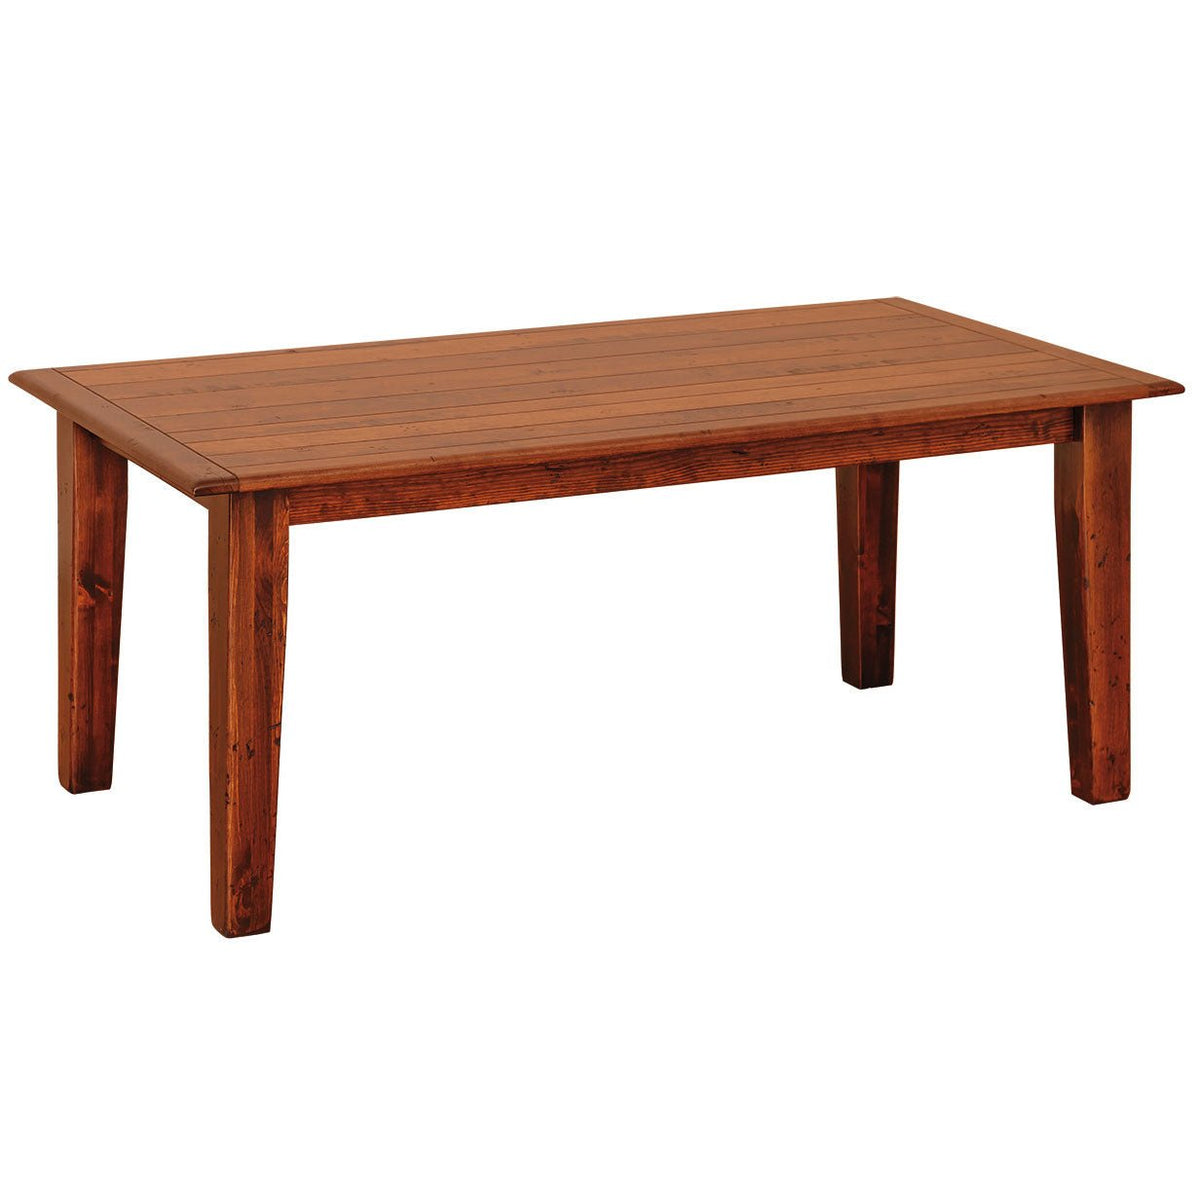 Creswell Plank Top Farm Table - snyders.furniture